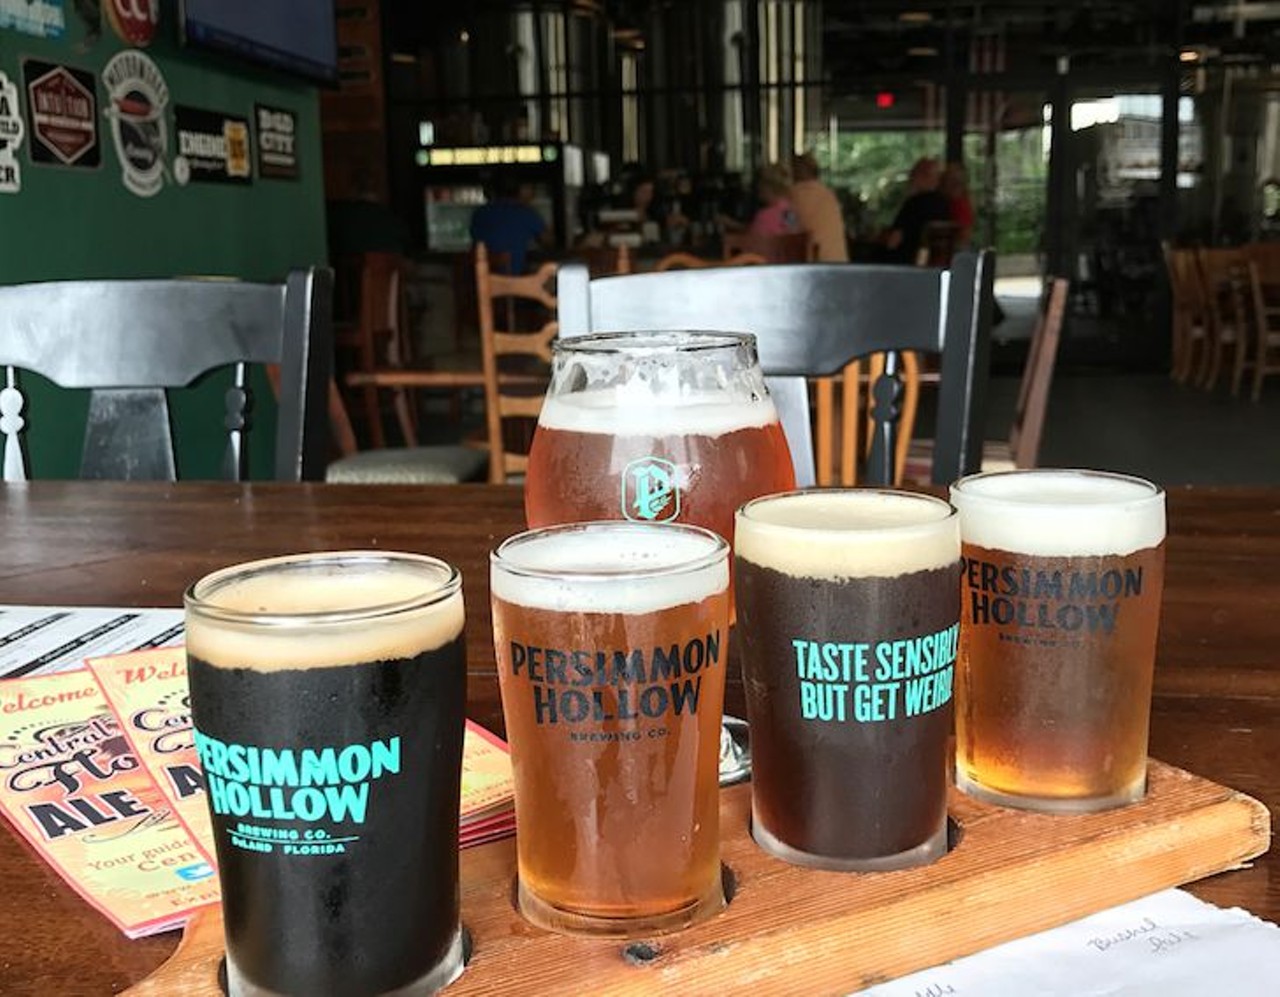 Persimmon Hollow Brewing Co.  
111 W. Georgia Ave., Deland, 386- 873-7350
Feel free to bring some tacos from Neighbors Artisan Taqueria before heading across the street to Persimmon Hollow Brewing where you can sipping on their variety of beers, like the Drunken Monk and Beach Hippie IPA.
Photo via drinksanford/Instagram